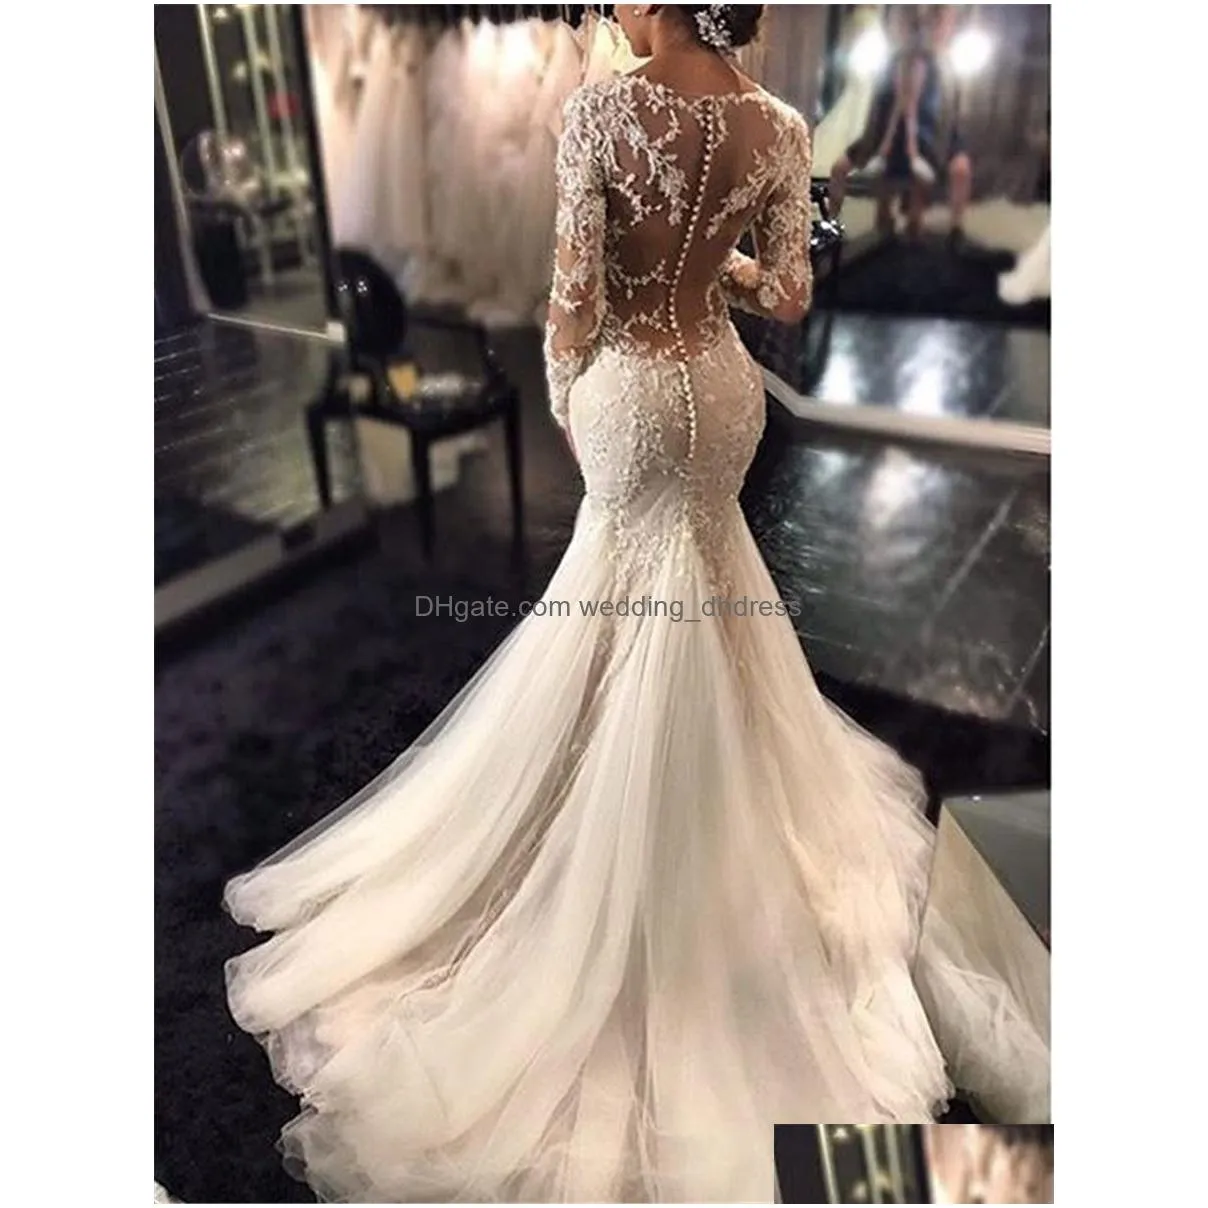 trumpet/mermaid v-neck long sleeves lace court train tulle applique lace wedding dresses illusion back back bridal dress with pick up